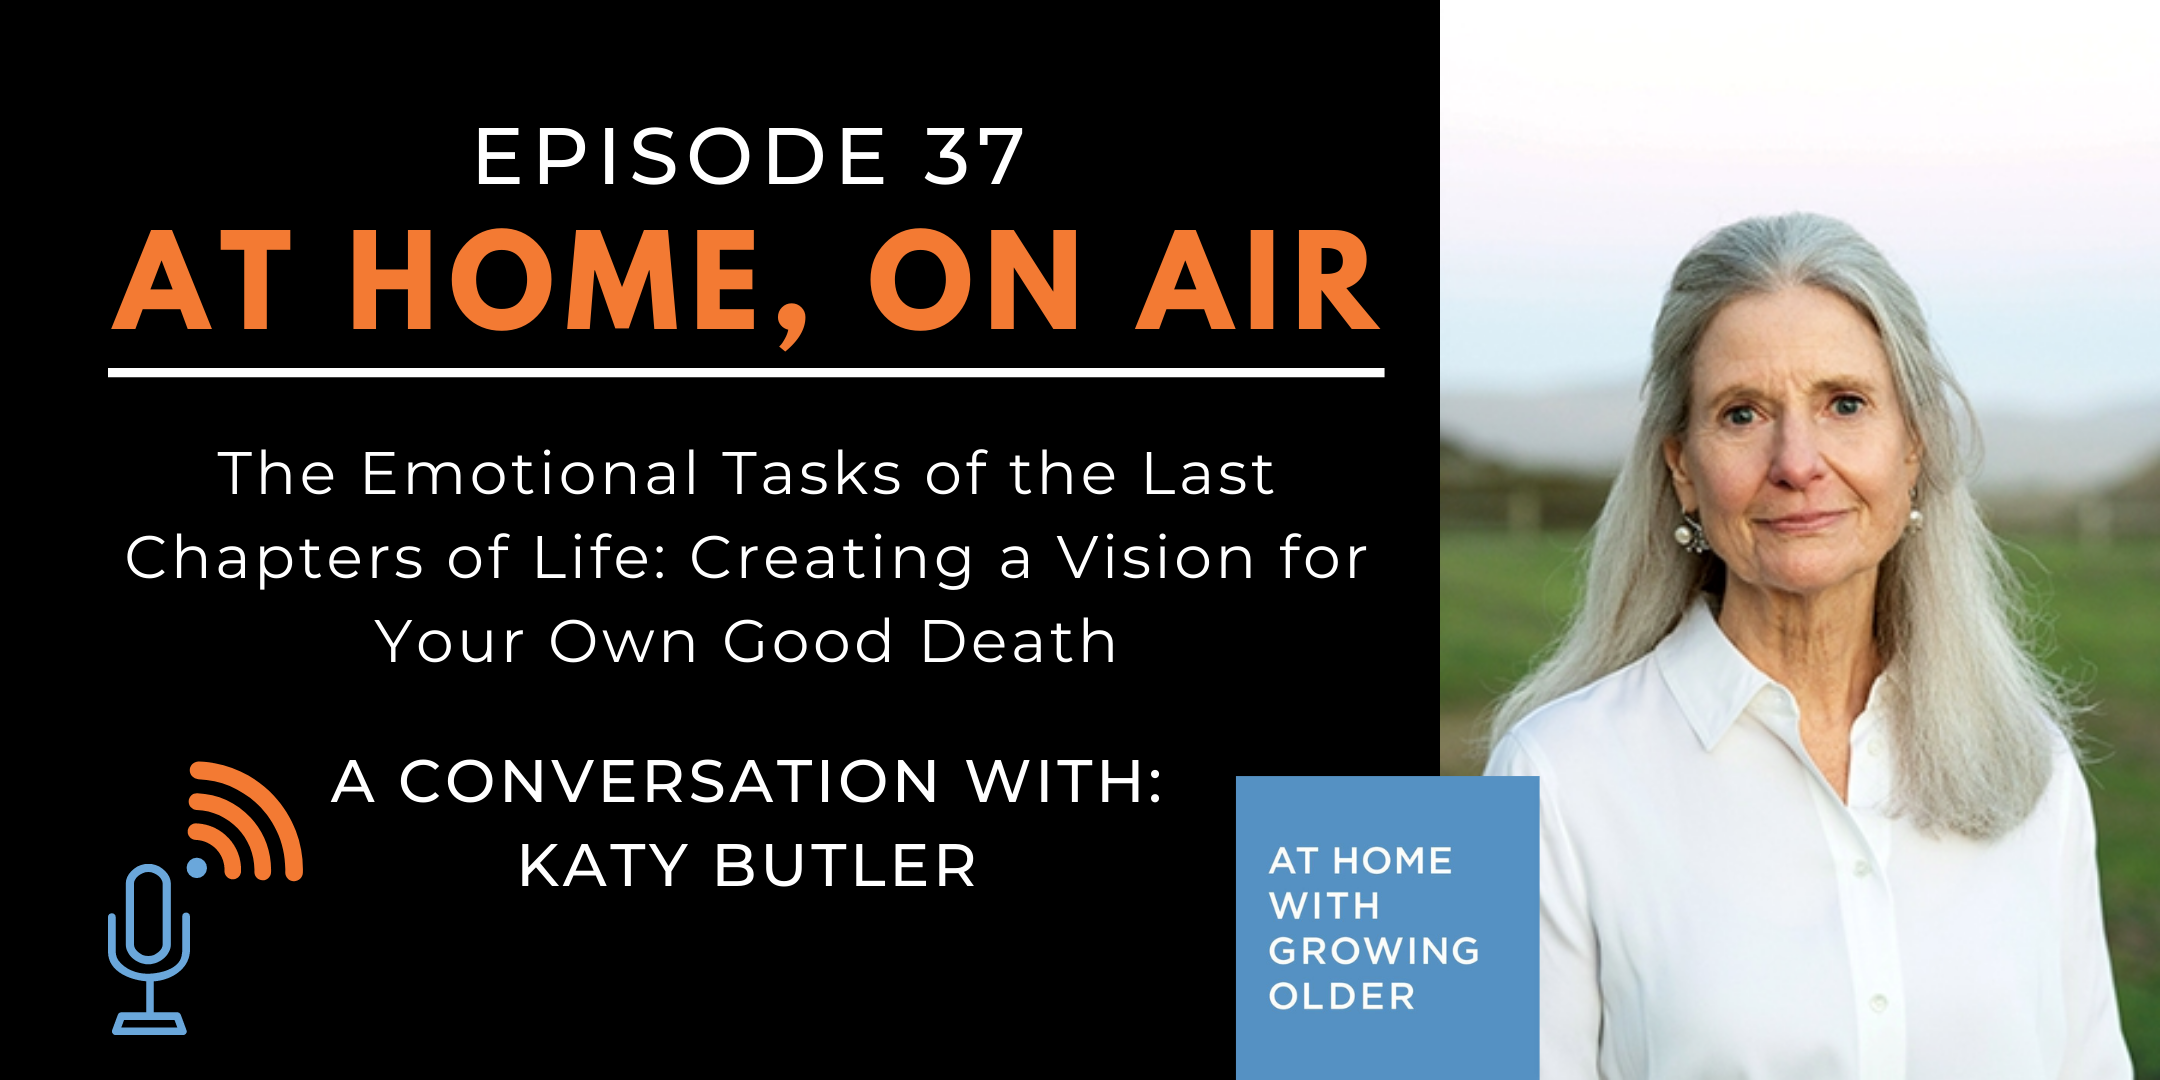 At Home, On Air:  A Conversation with Katy Butler